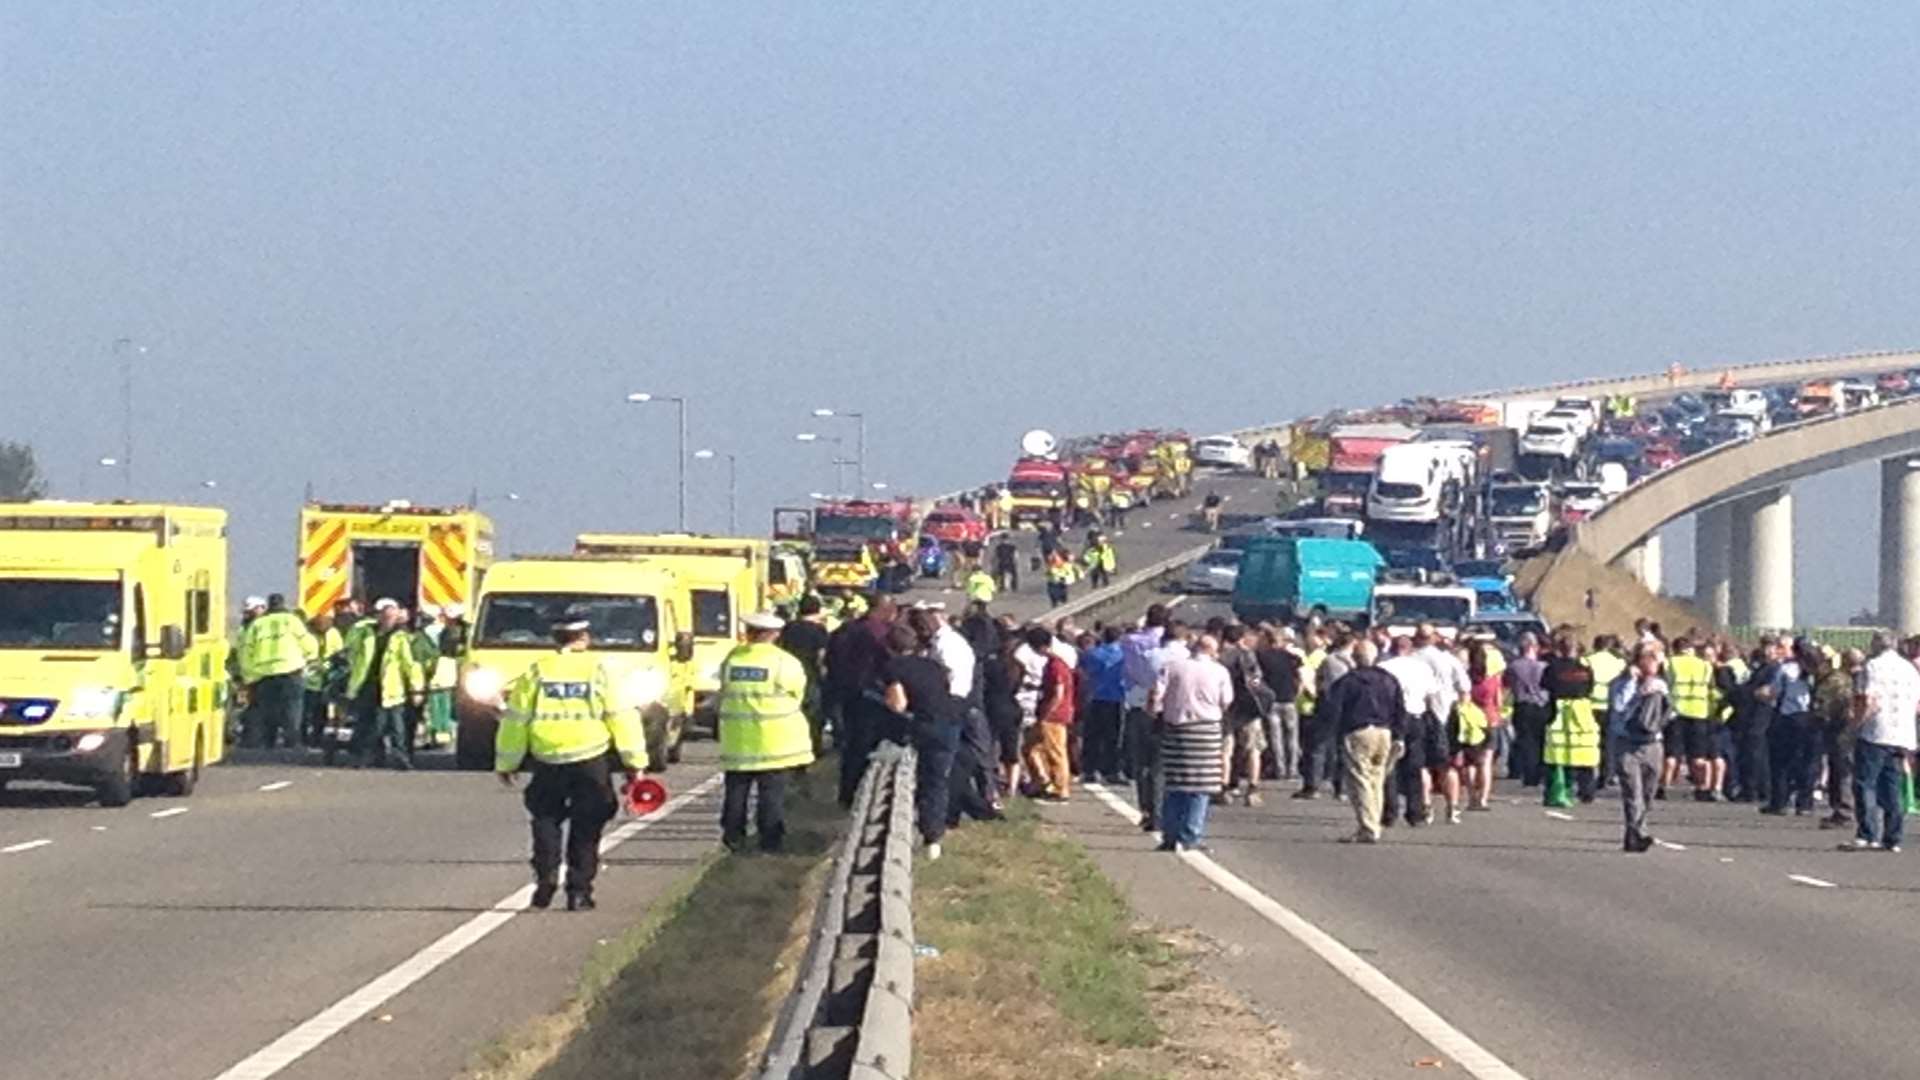 Crowds gather on the Sheppey Crossing after the pile-up